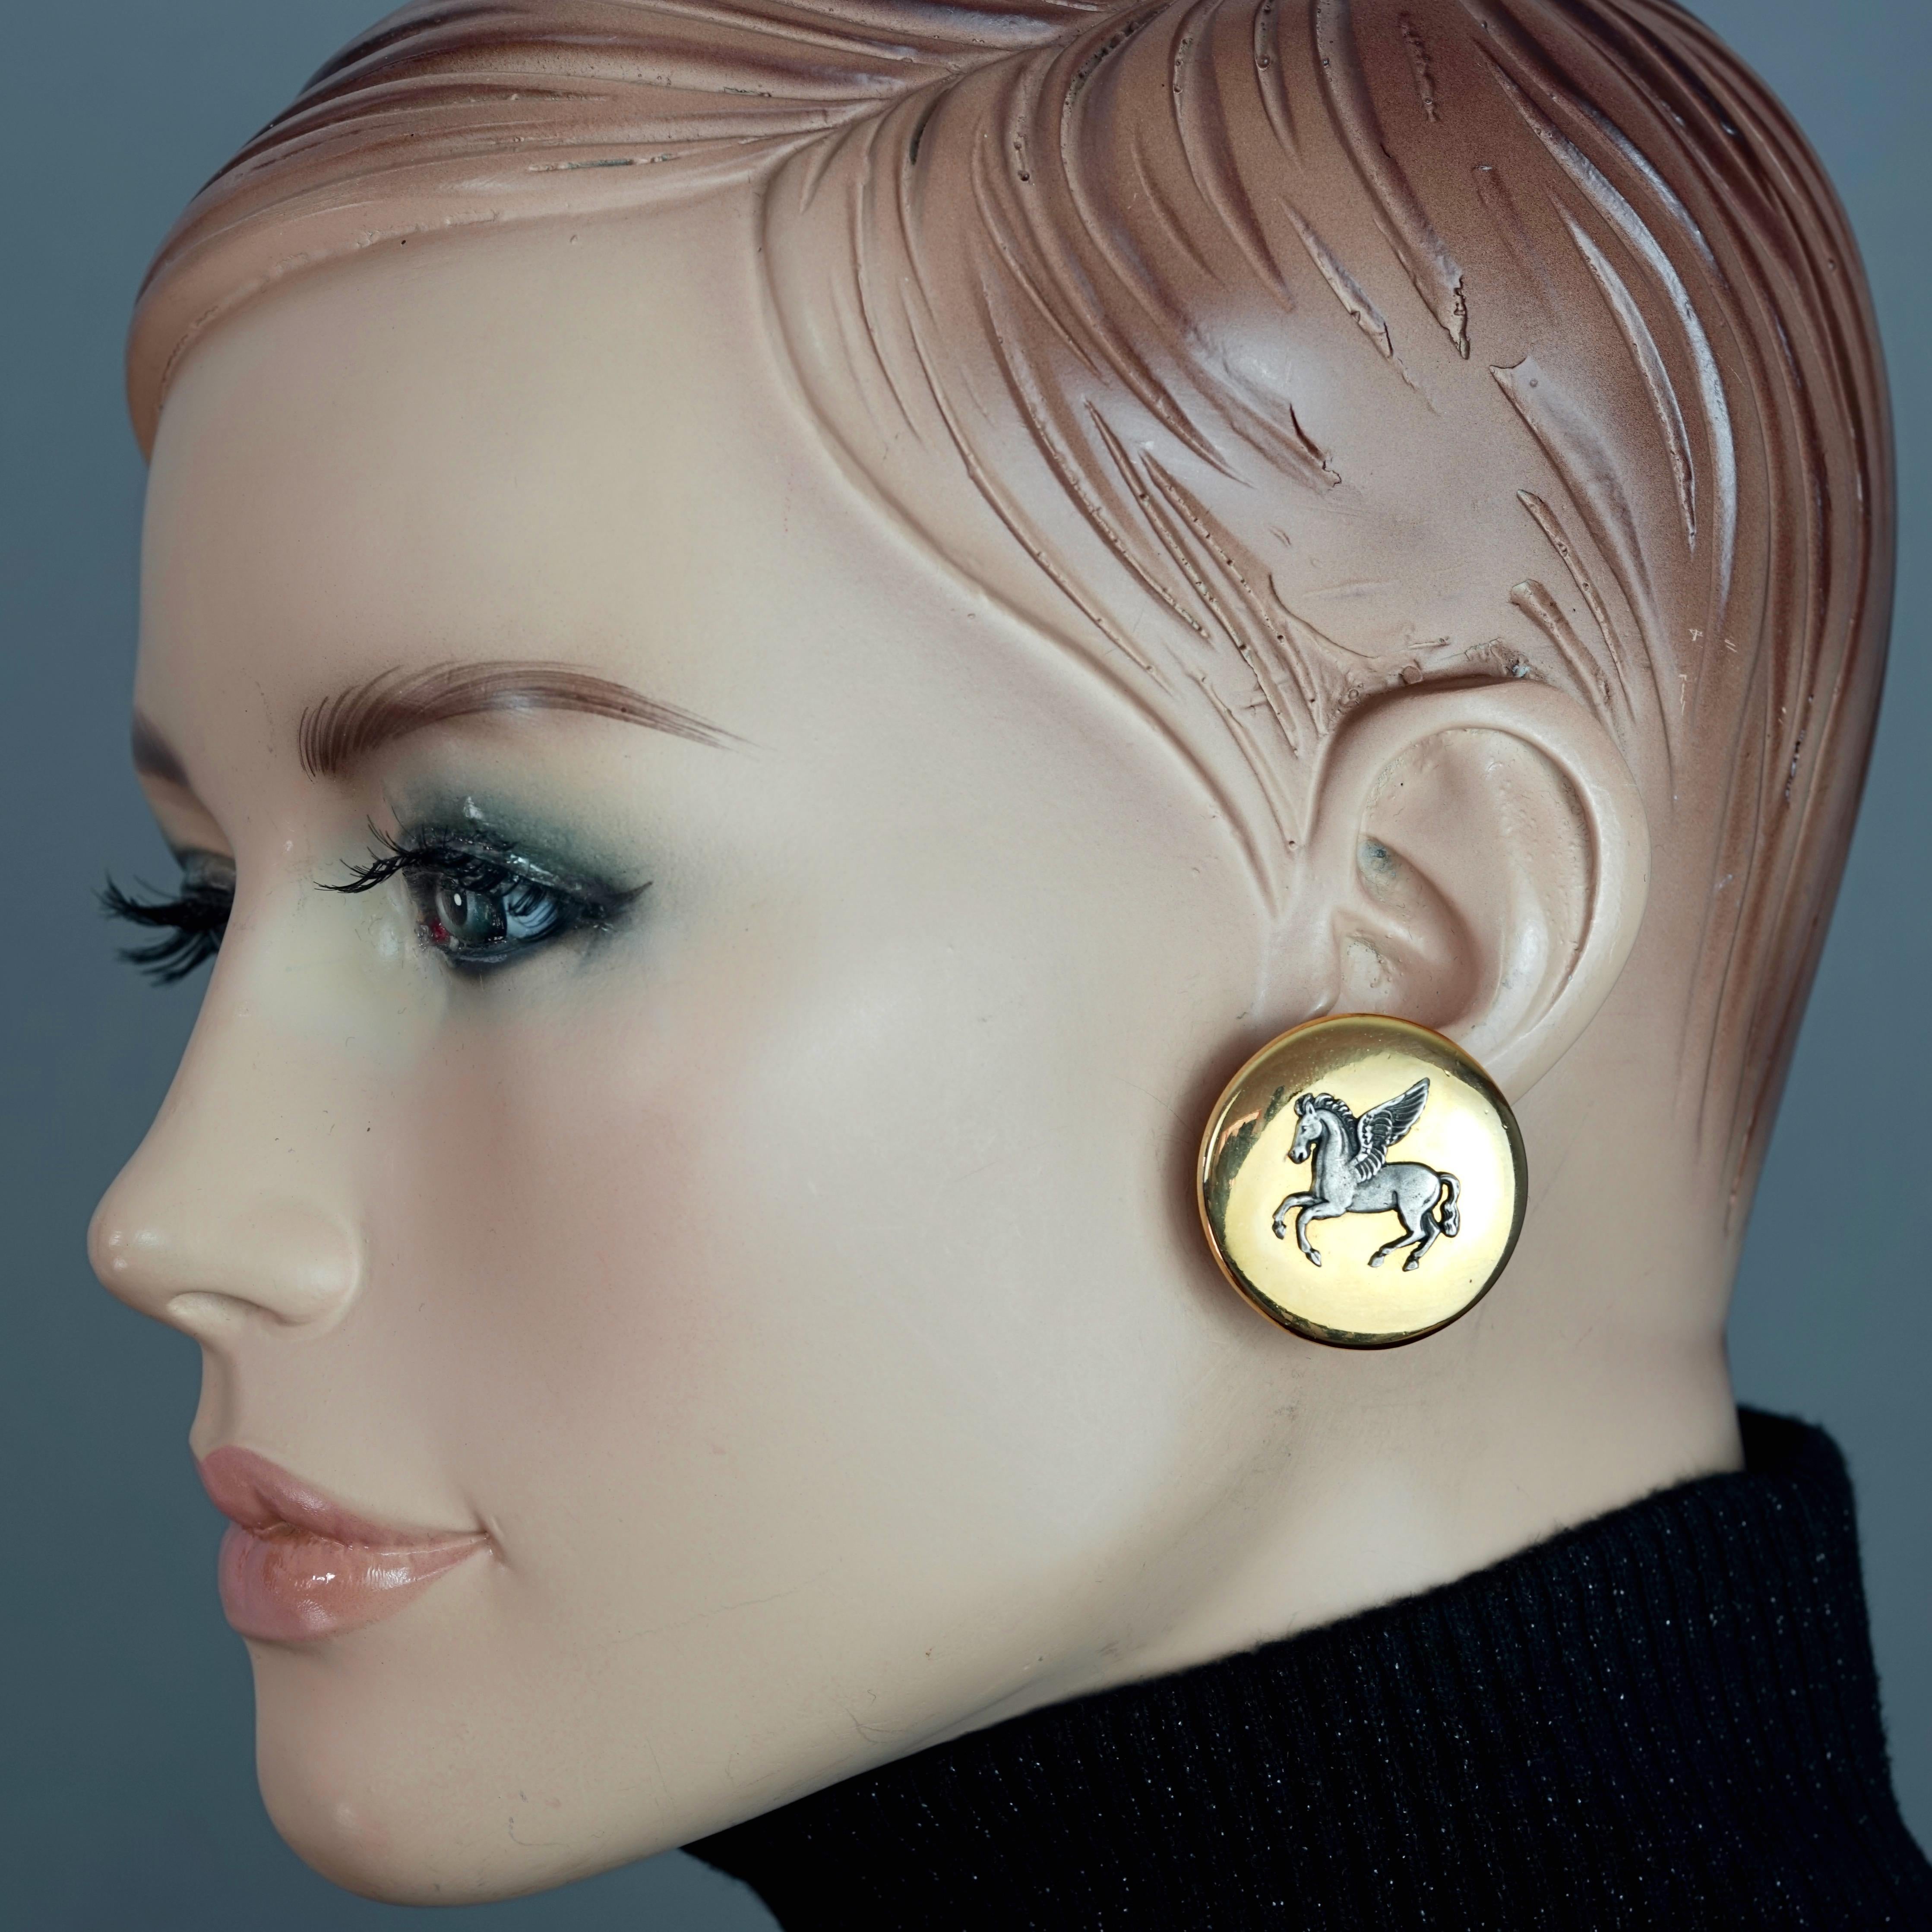 Vintage HERMES Pegasus Earrings

Measurements:
Height: 1.22 inches (3.1 cm)
Width: 1.22 inches (3.1 cm)
Weight per Earring: 13 grams

Features:
- 100% Authentic HERMES PARIS.
- Medallion earrings with embossed pegasus.
- Gold and silver tone